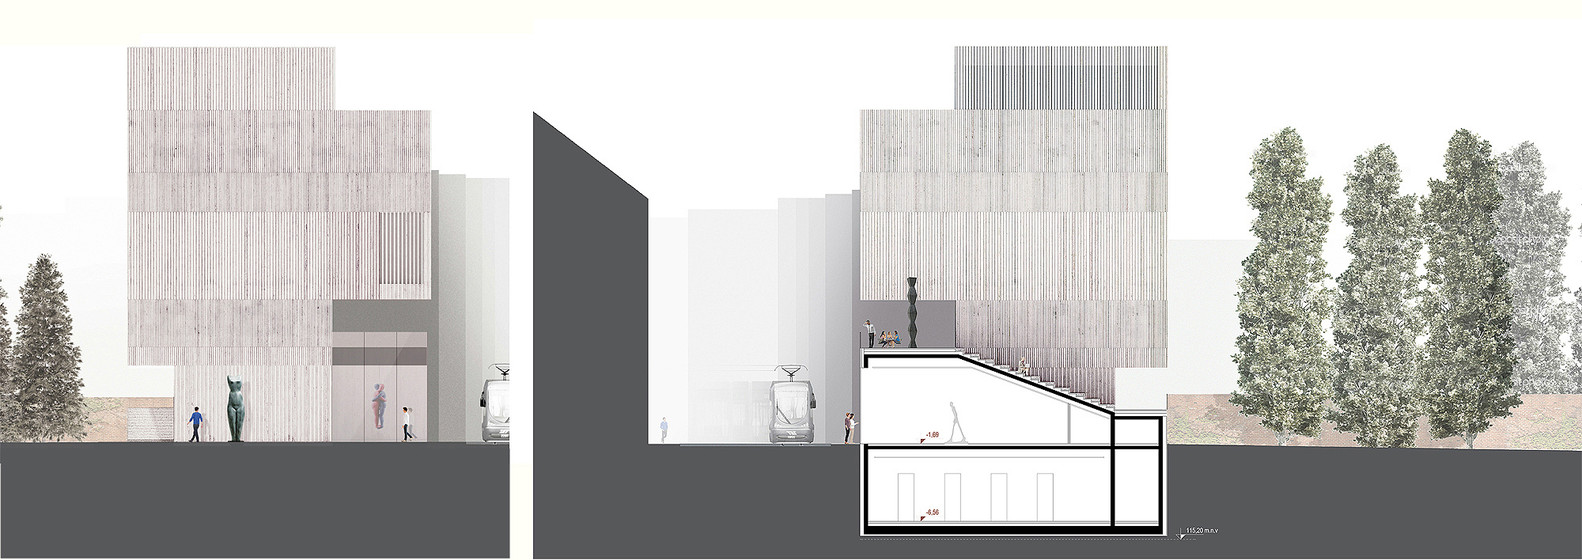 Multiplan Arhitekti Wins Competition for New Gallery in Zagreb-27